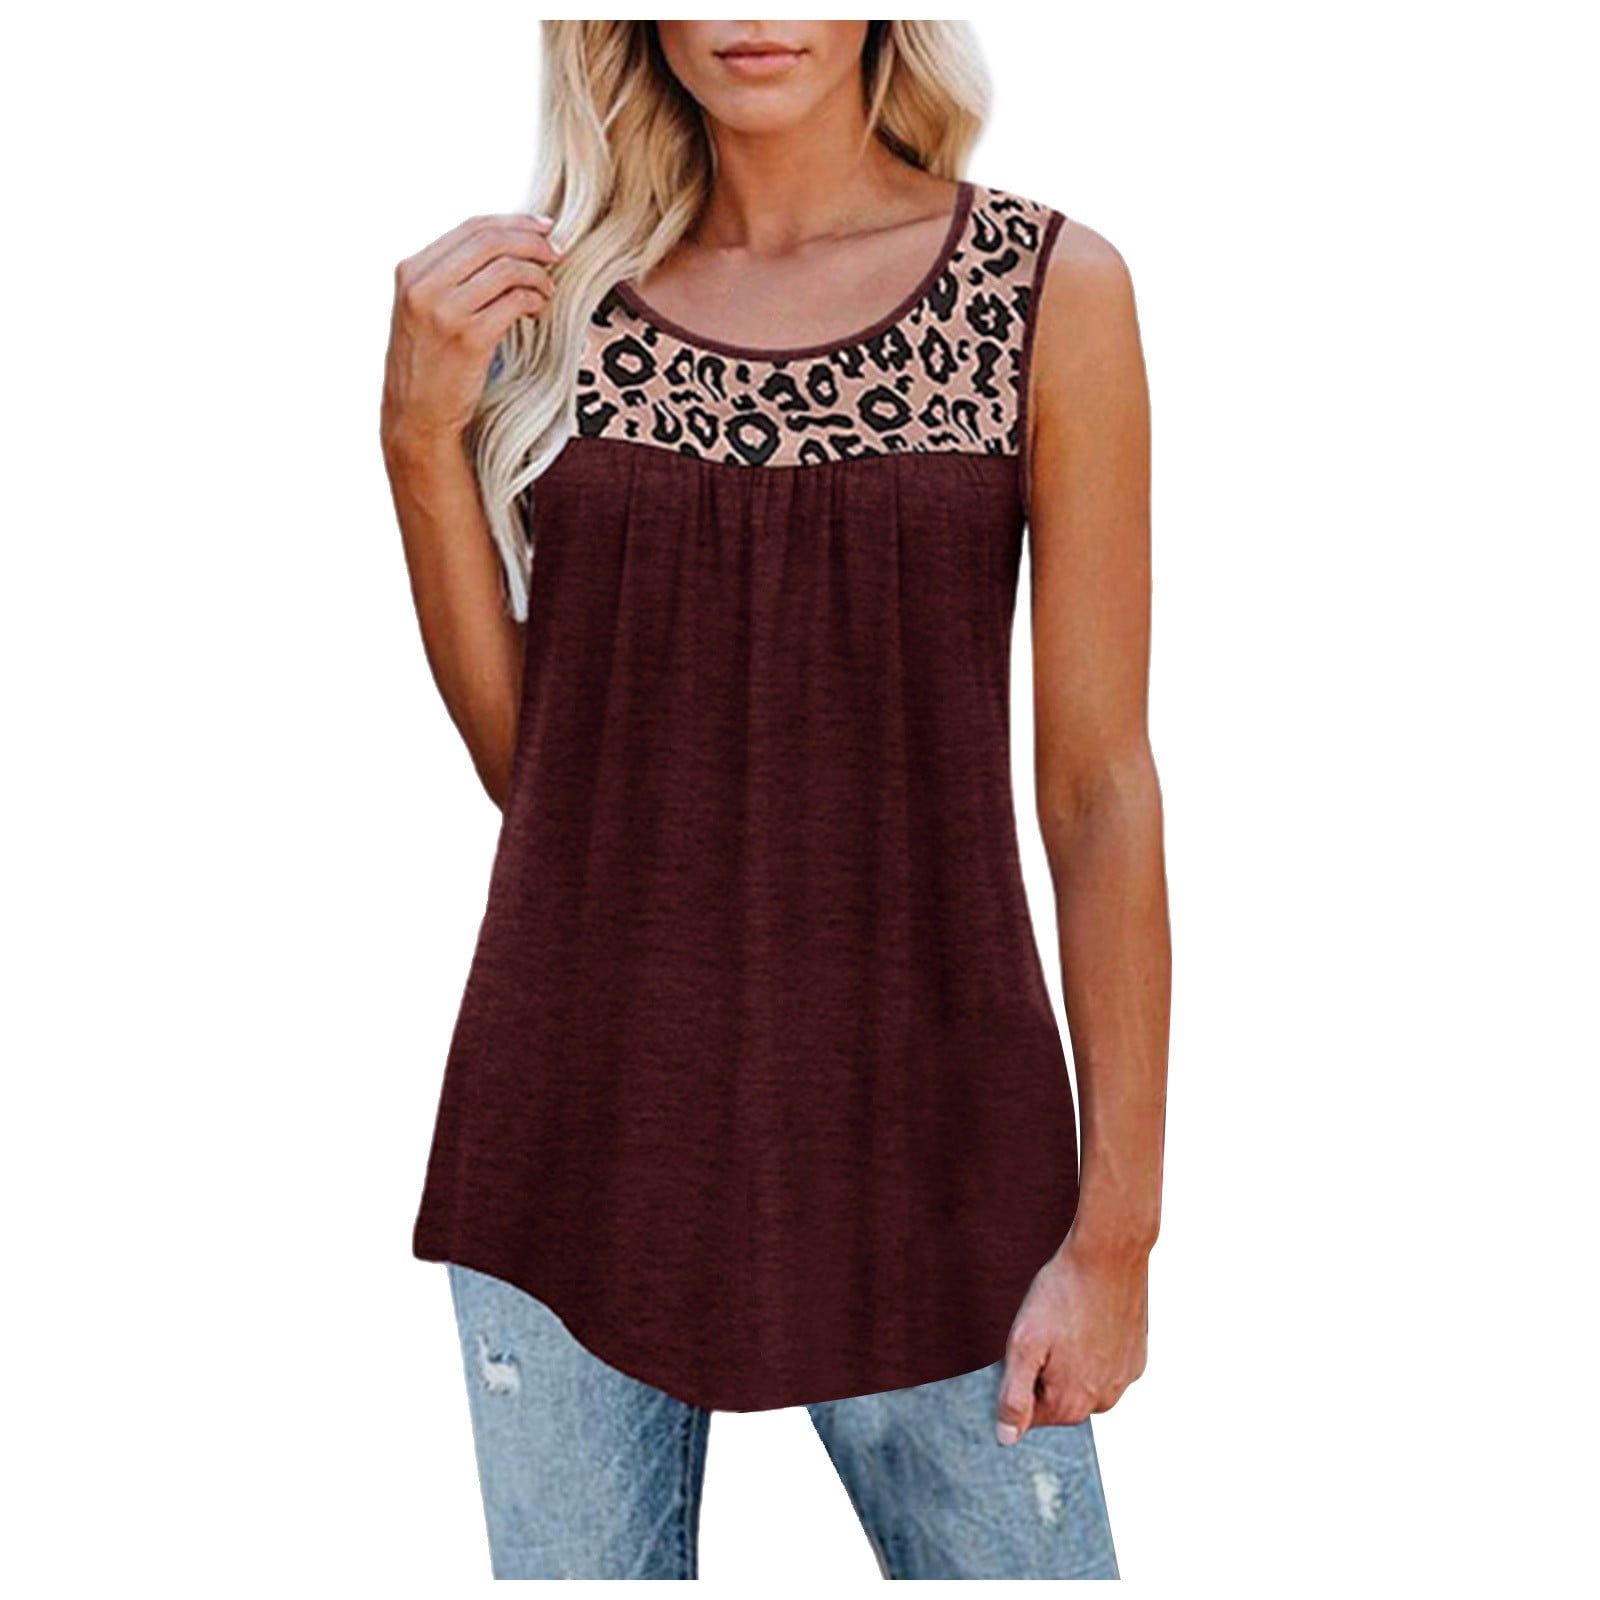 Womens Tank Tops Loose Fit Summer Lace Halter Tops Sleeveless